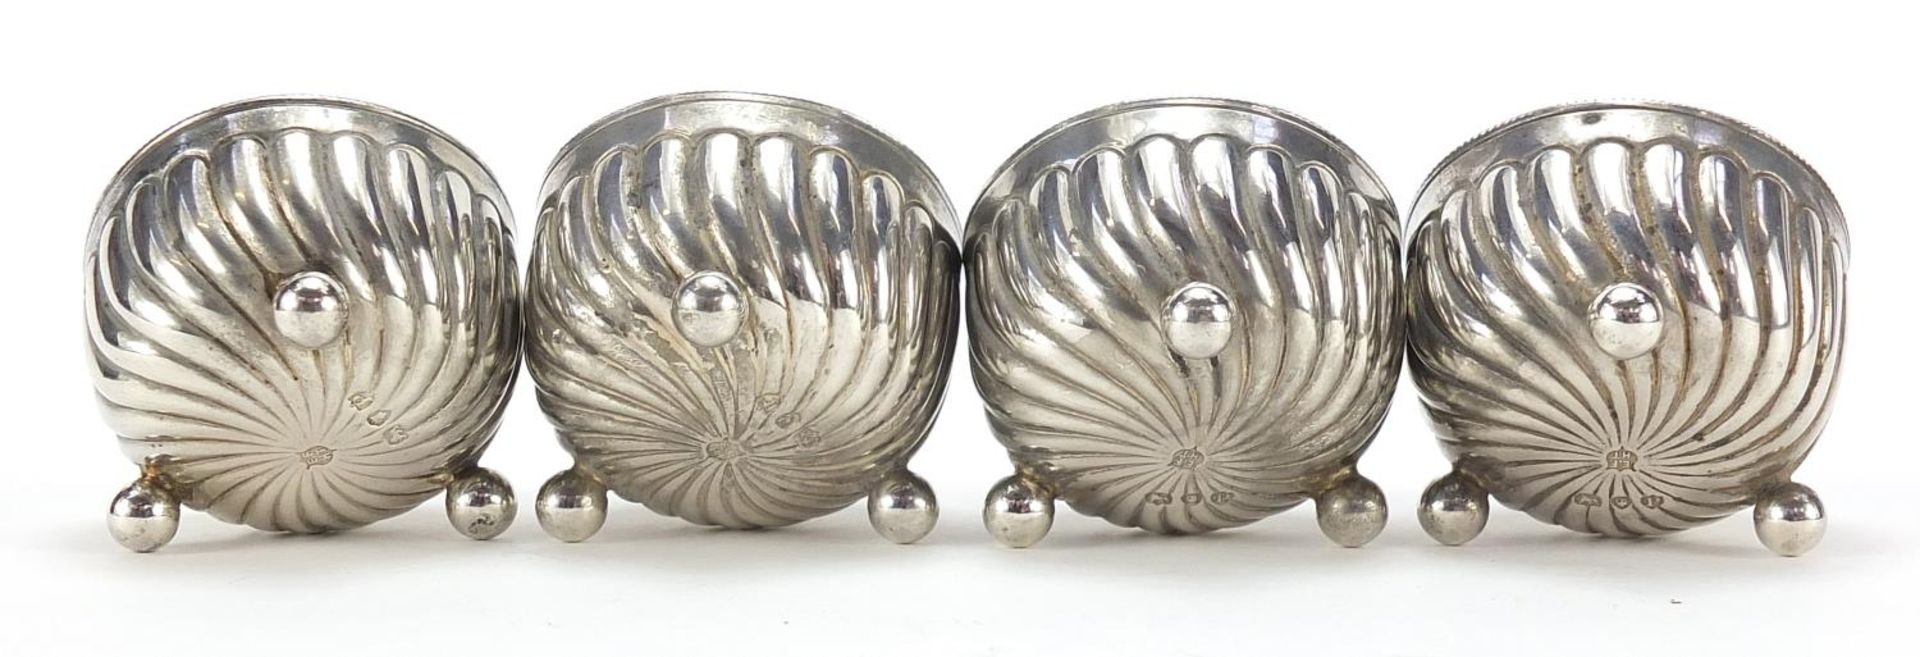 Horace Woodward & Co, set of four Victorian silver open salts with ball feet, London 1890, 3cm - Image 3 of 4